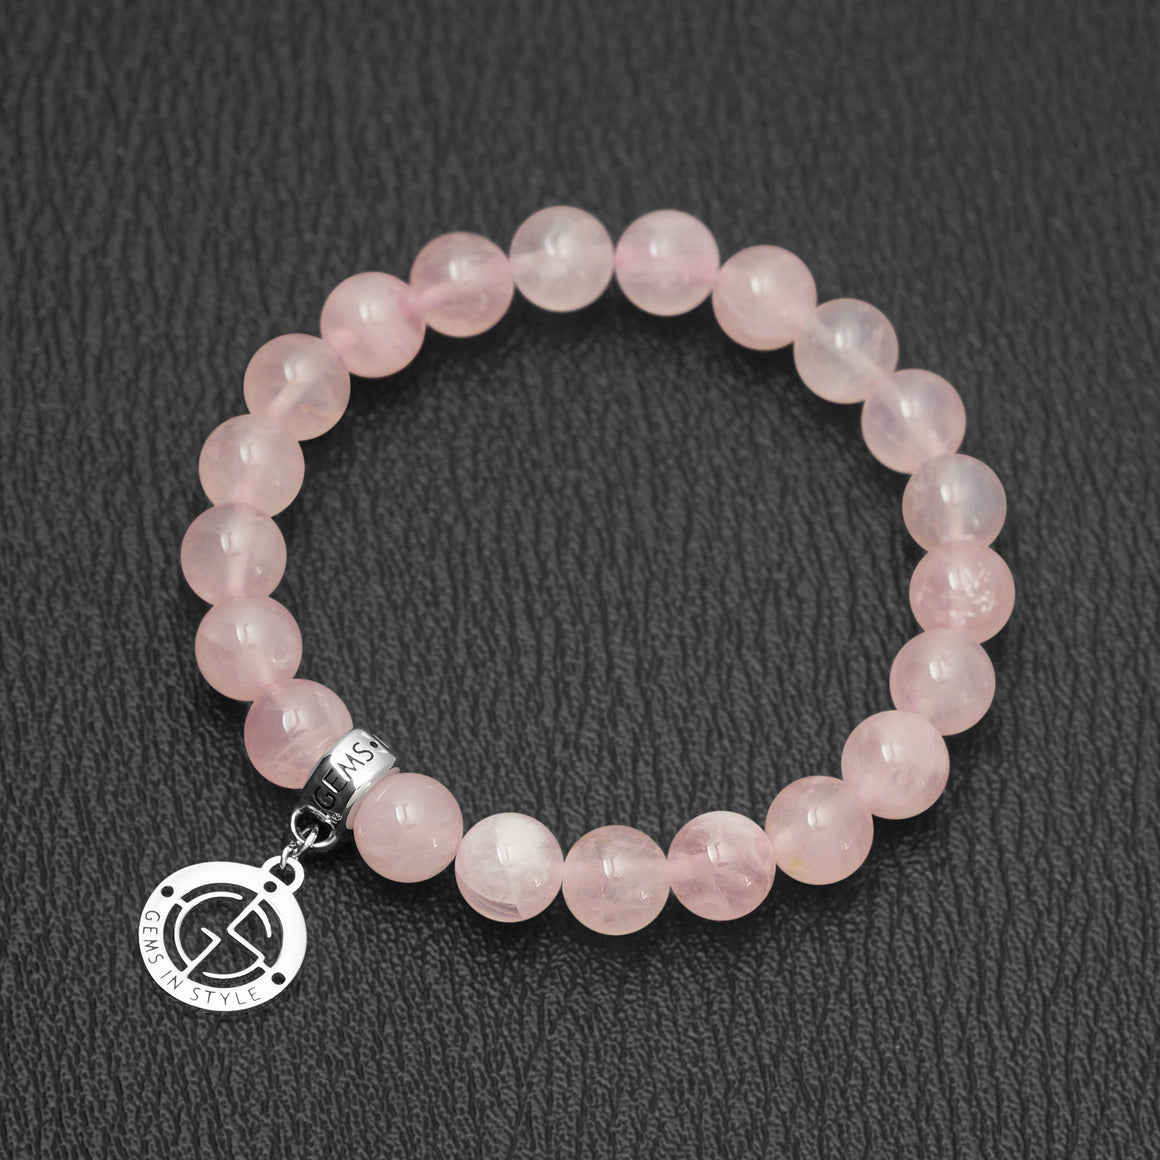 Madagascar Rose Quartz natural gemstone bracelet with branded silver charm by Gems In Style Jewellery.